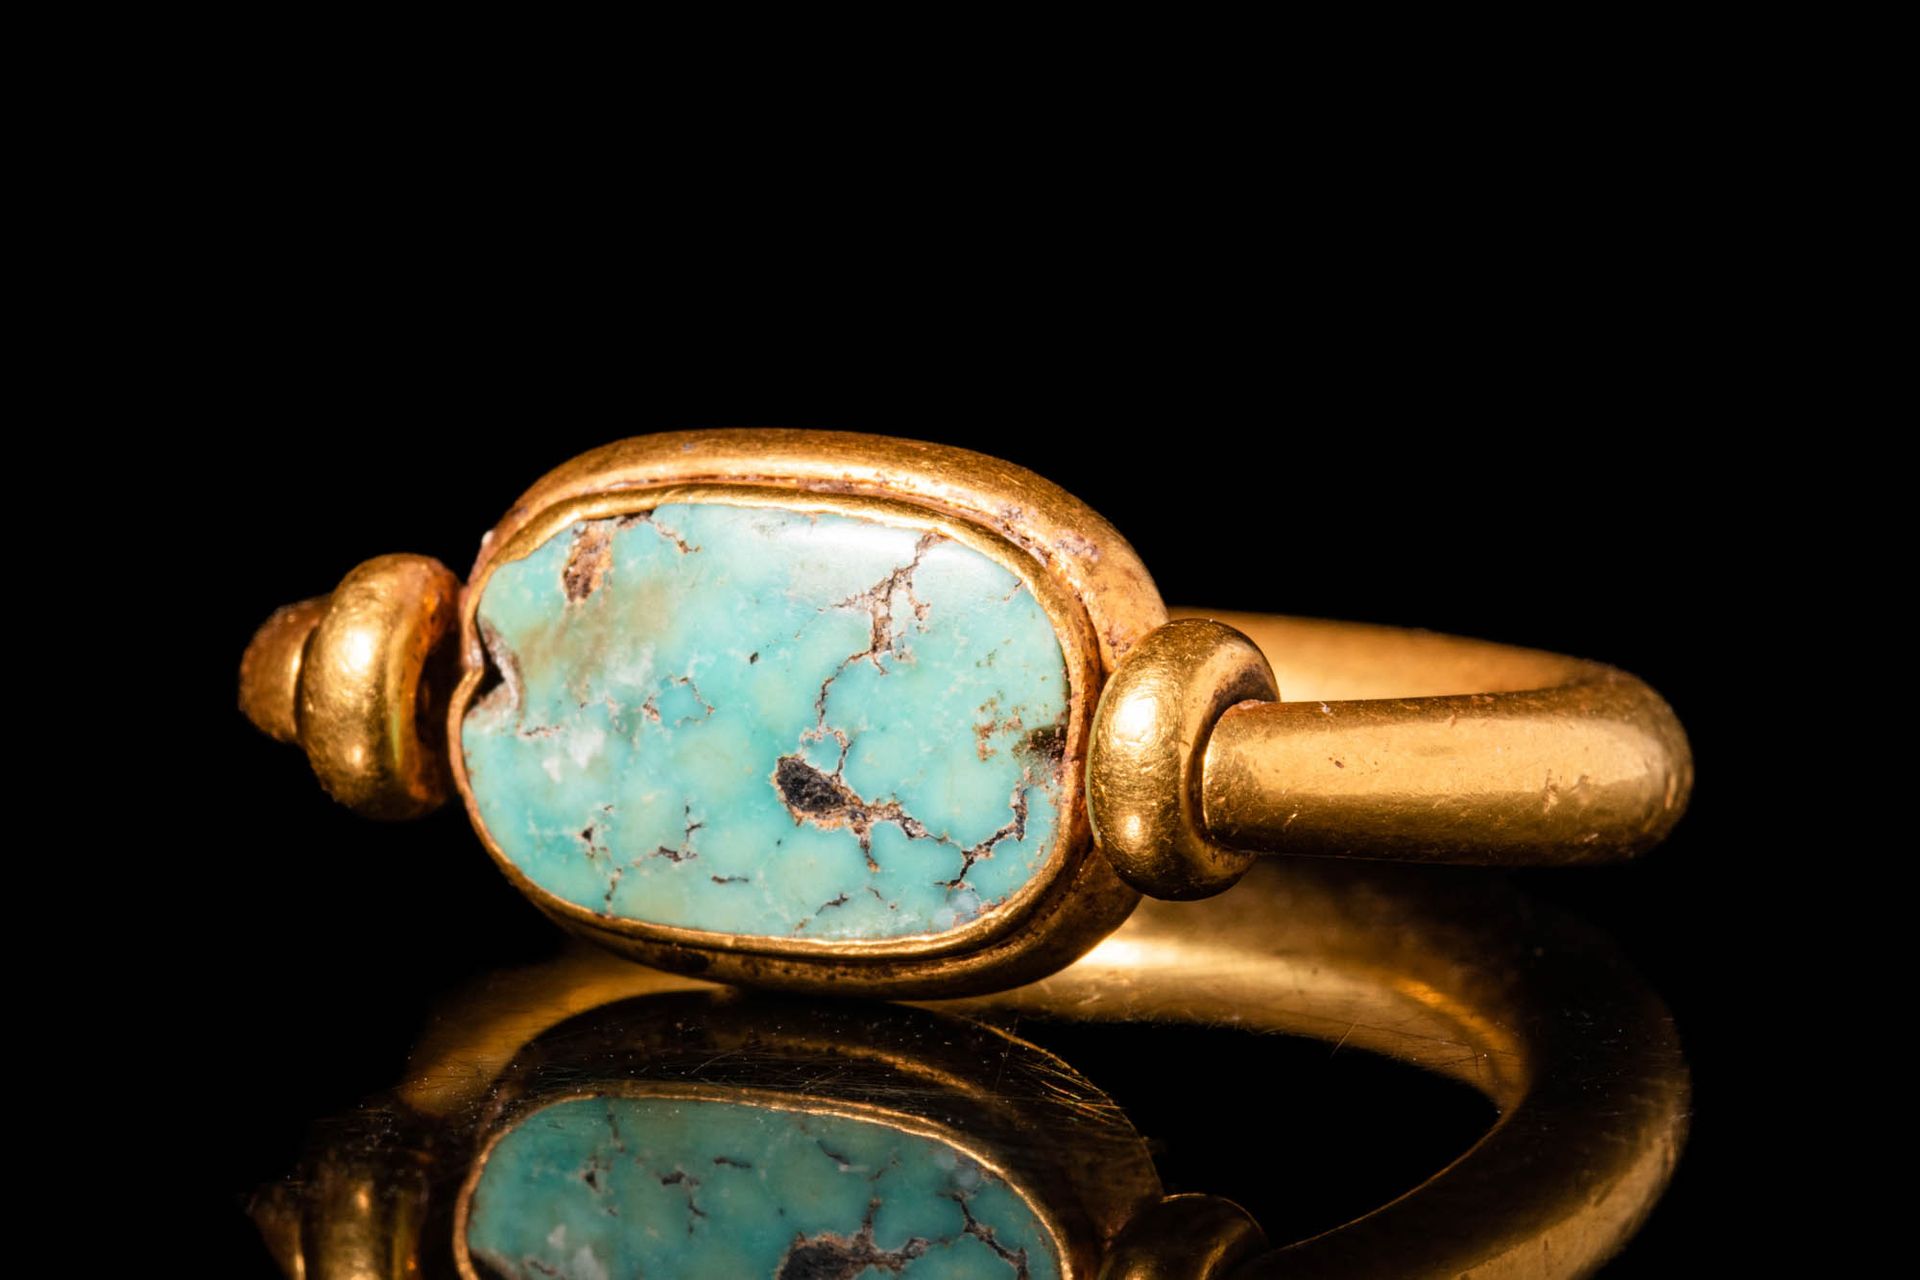 EGYPTIAN GOLD FINGER RING WITH TURQUOISE BEZEL Nuovo Regno, ca. 1550 - 1069 A.C.&hellip;